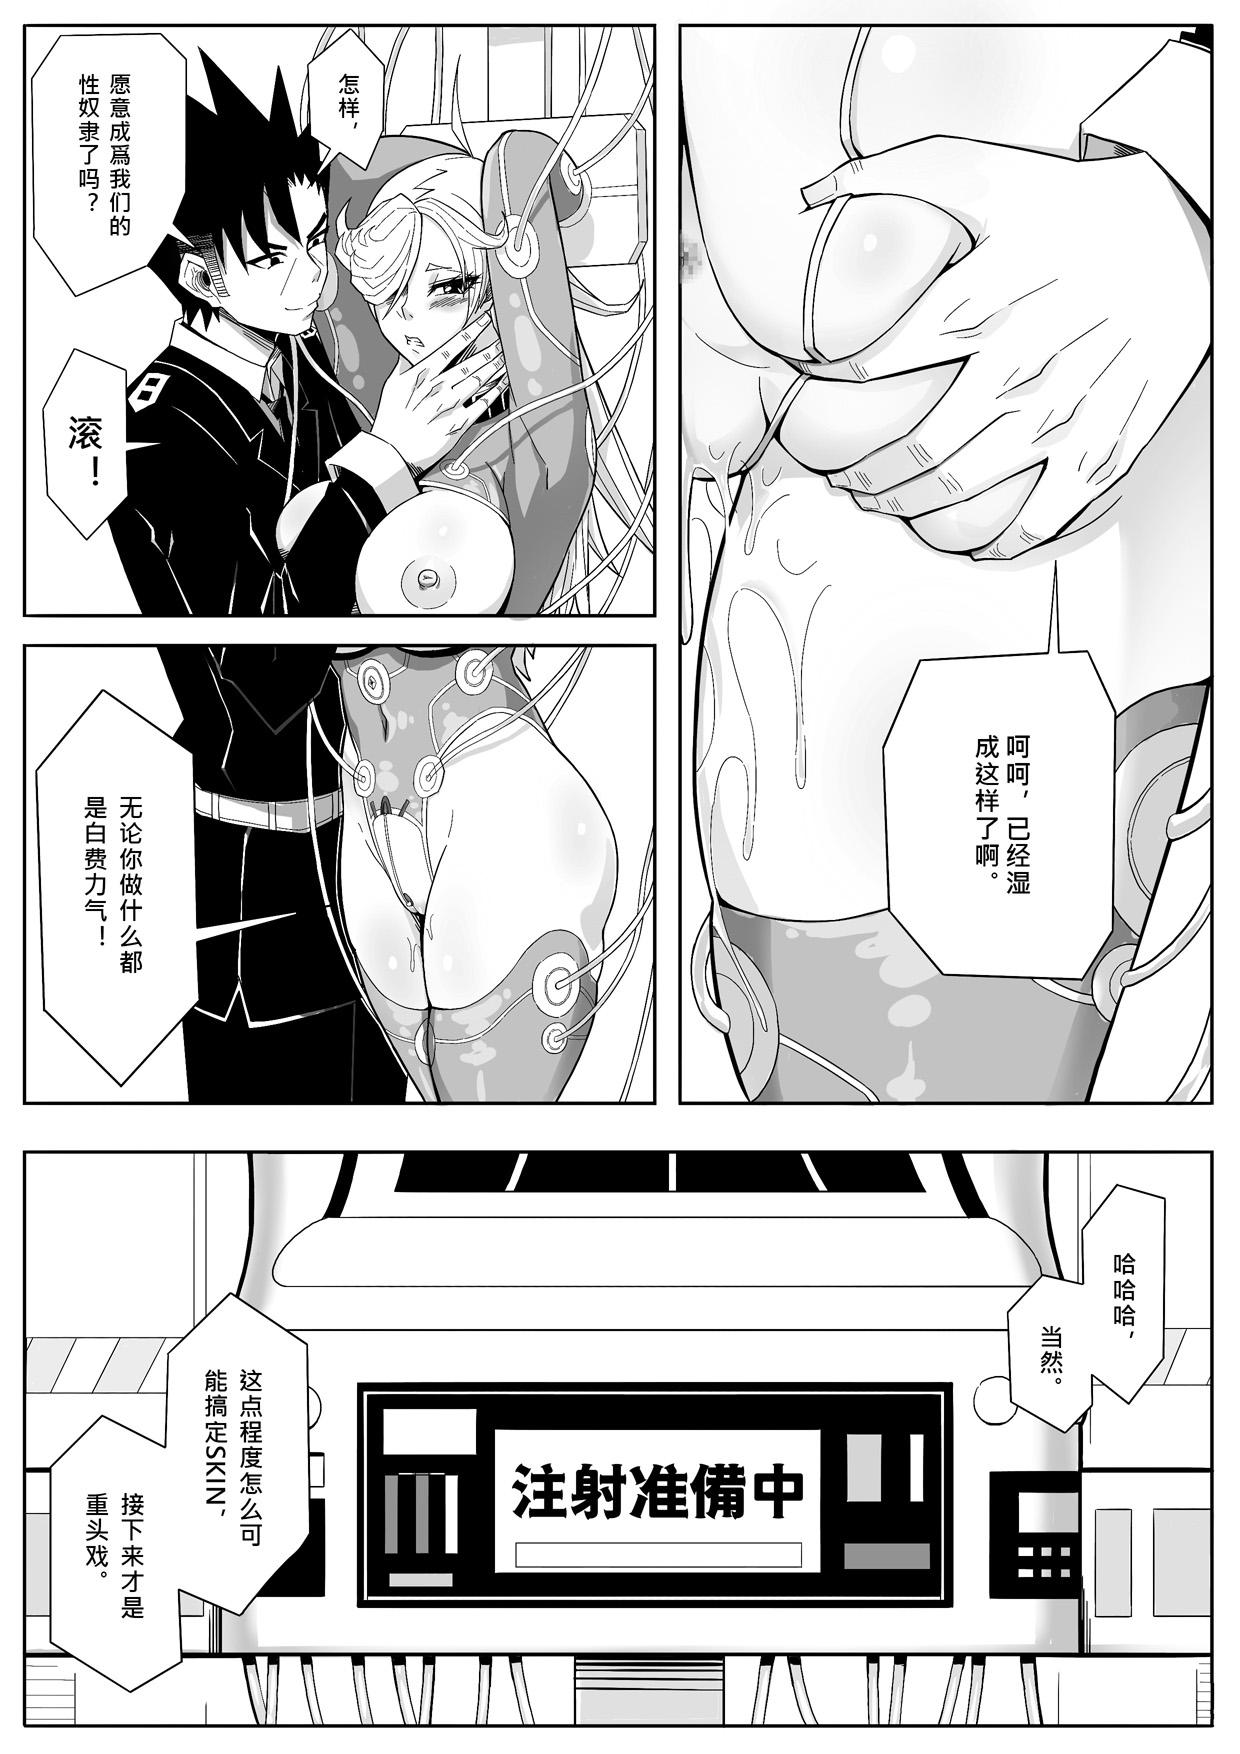 Consolo 奴隶特工队·常规任务02 Gay Physicals - Page 11